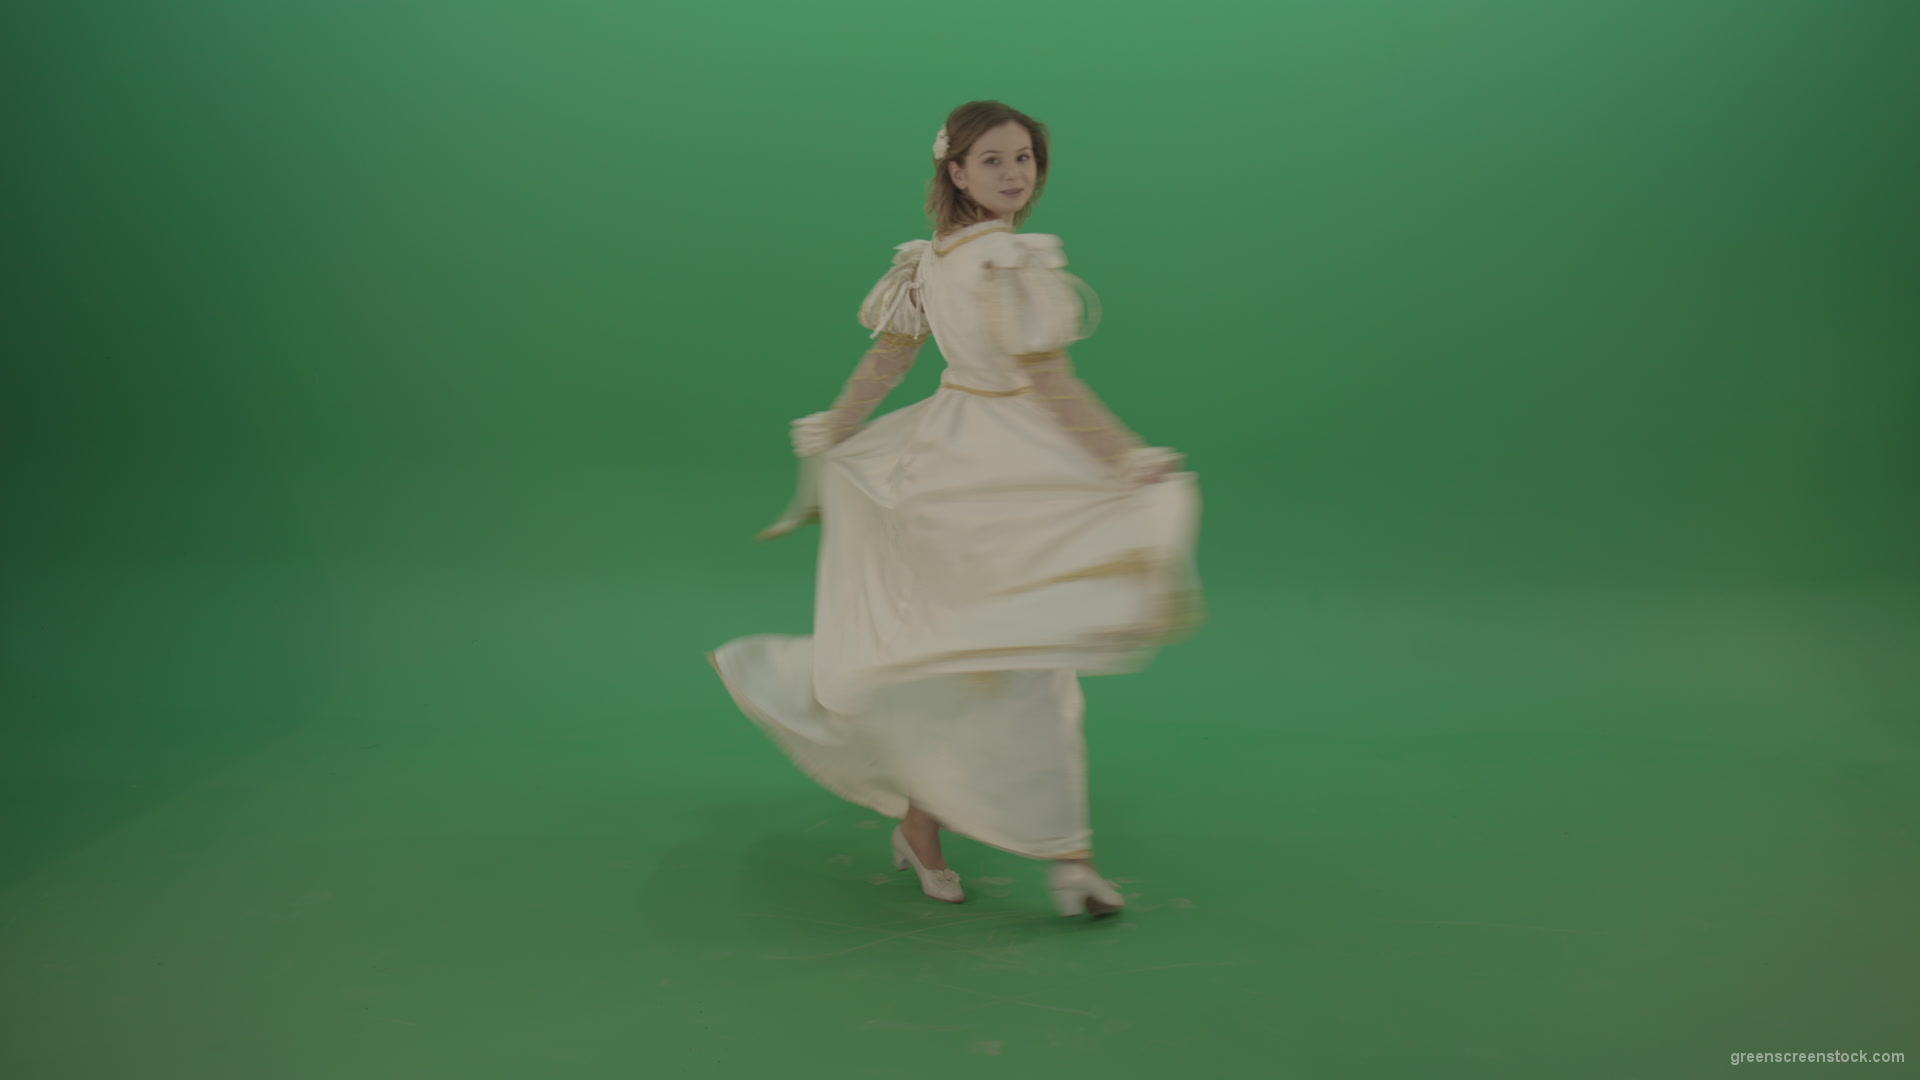 Princess-dances-twisting-around-the-circle-isolated-on-chromakey-background_005 Green Screen Stock